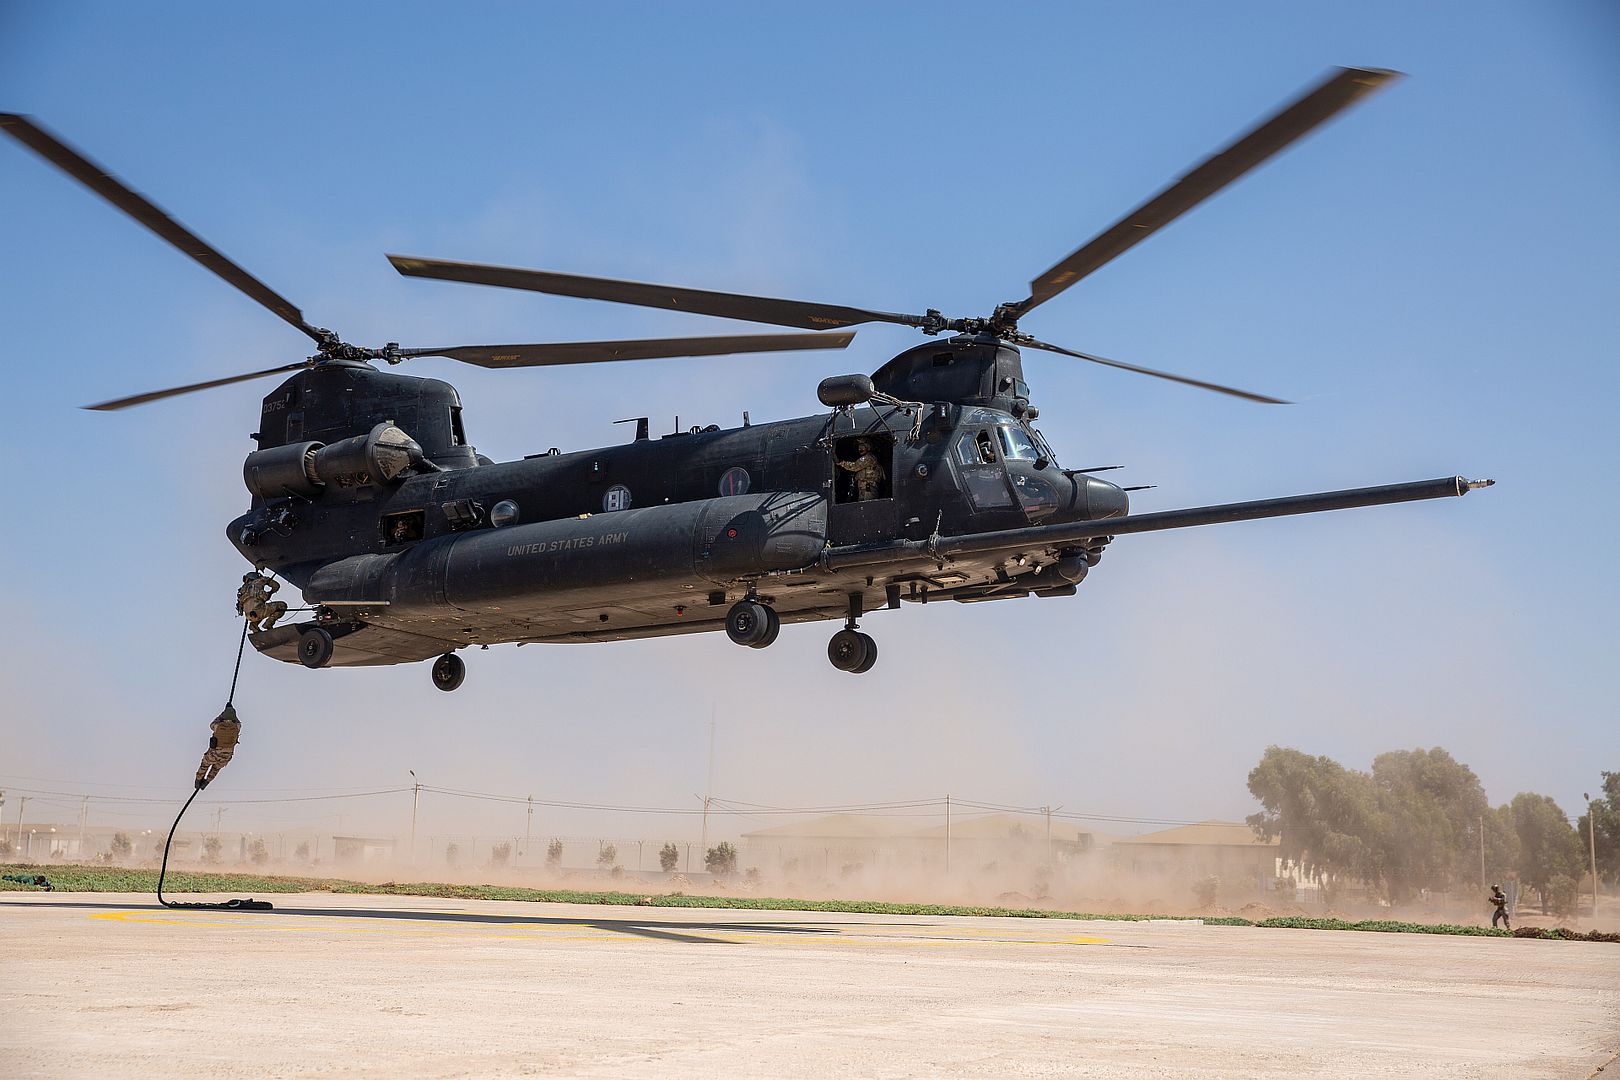 47 Chinook From The 160th Special Operations Aviation Regiment During Exercise African Lion 2021 At Tifnit Morocco Africa On June 14 2021